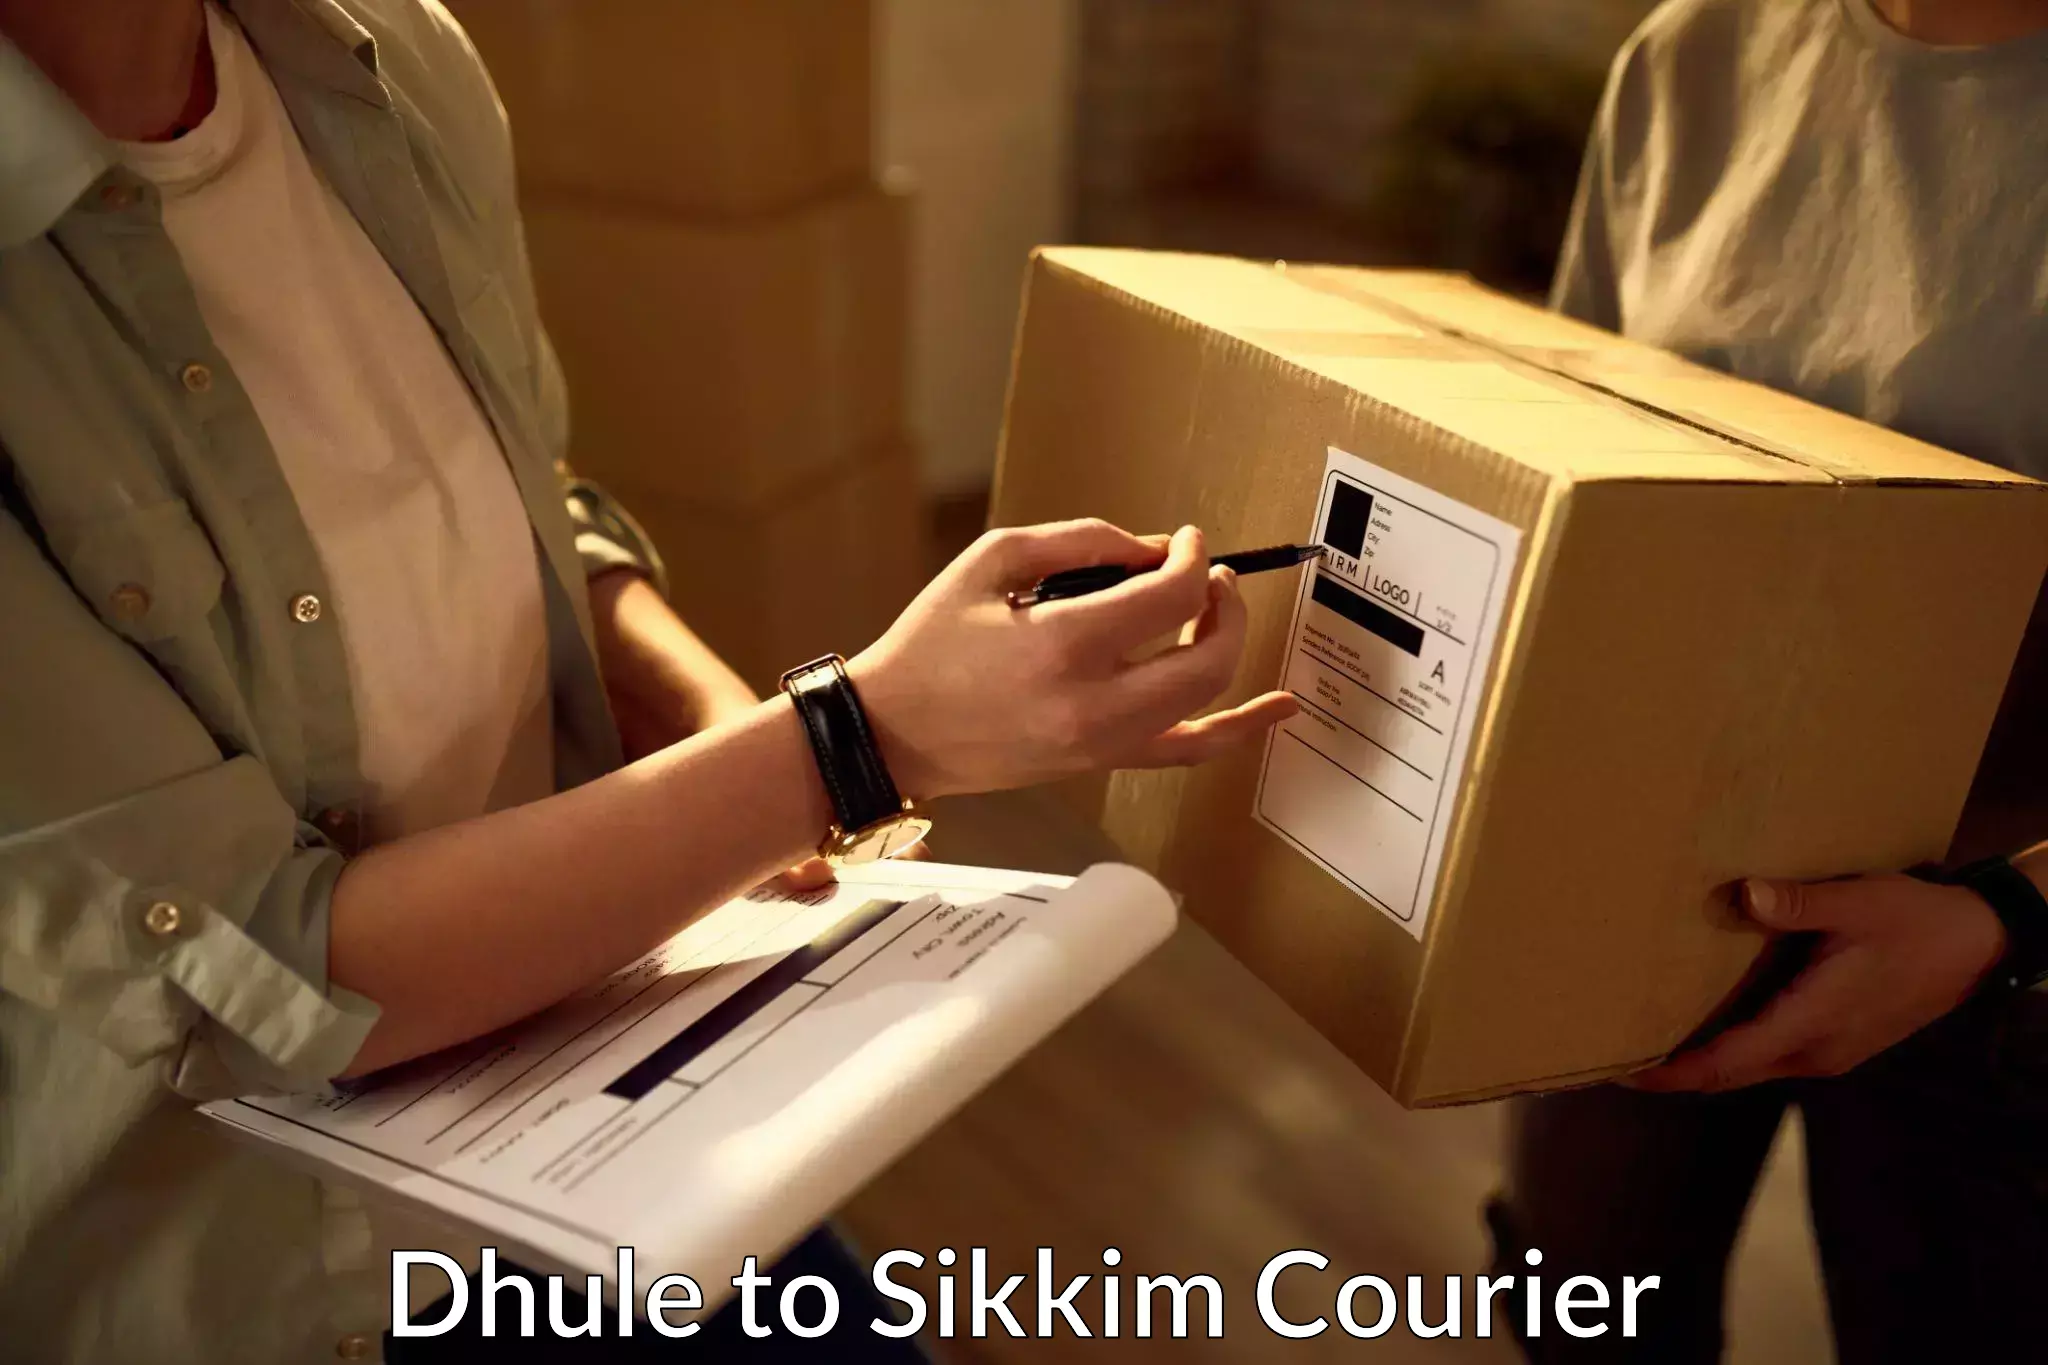 Advanced shipping network Dhule to Sikkim